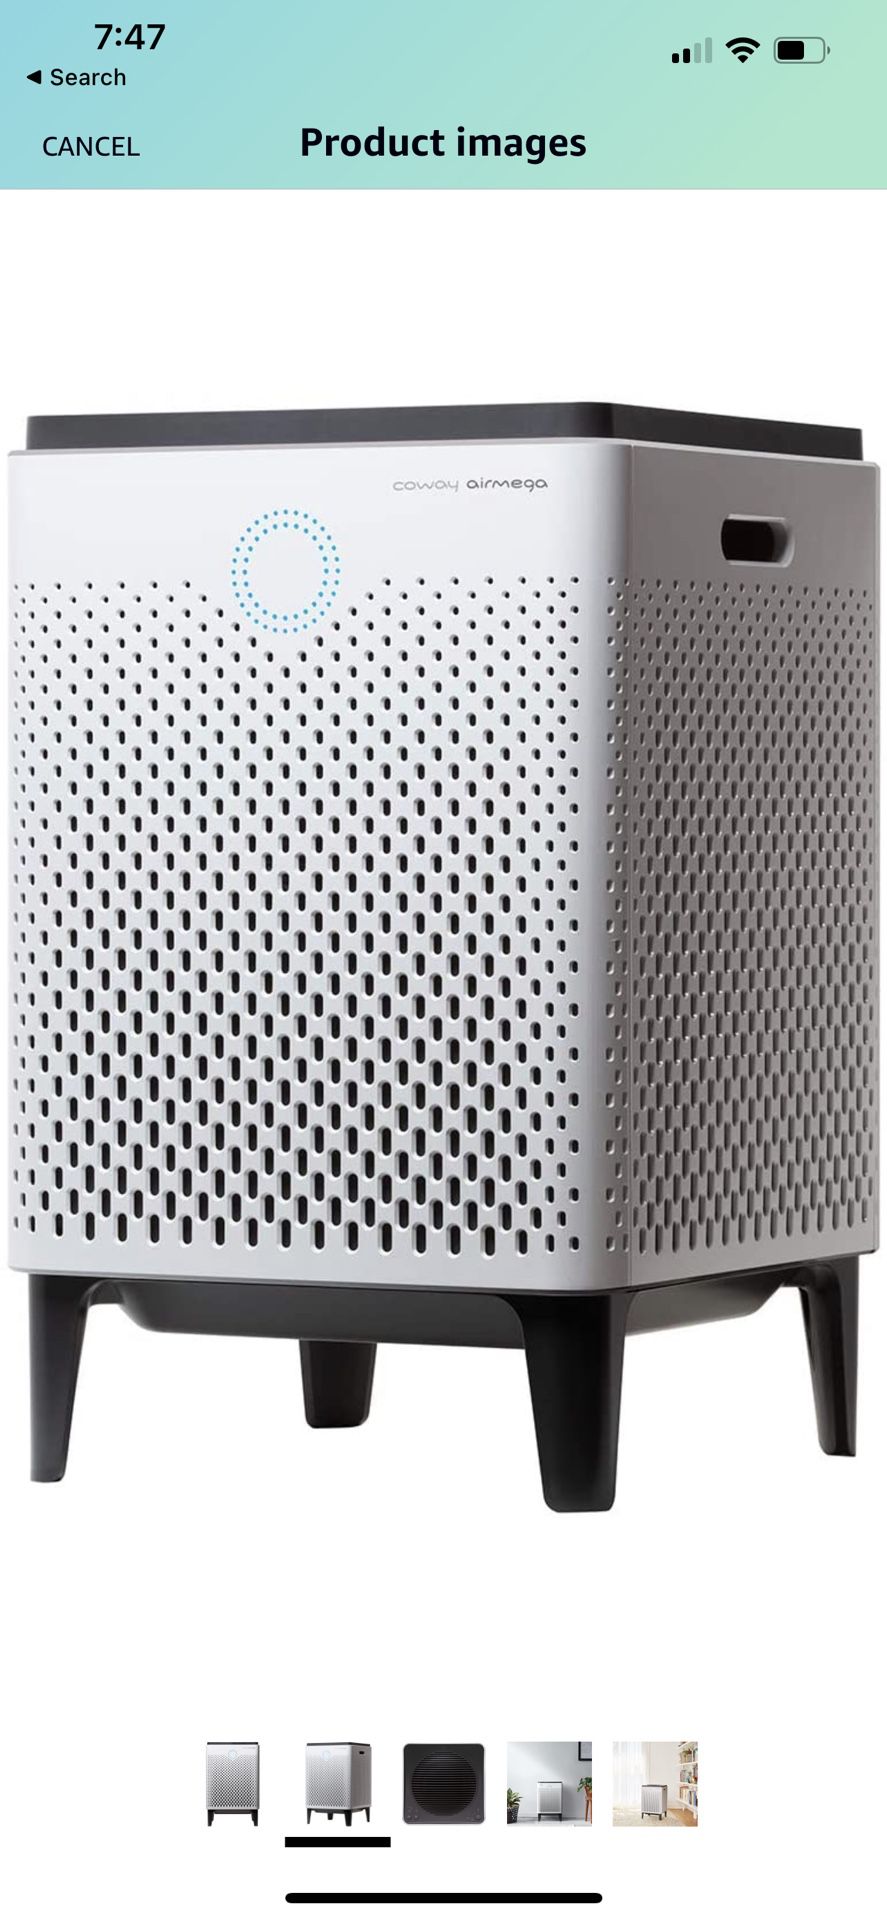 Coway Airmega 300 (Covers 1,256 sq. ft.) with Smart Technology True HEPA Air Purifier, 1256 https://offerup.com/redirect/?o=c3EudGY=, White ⚡️retail $